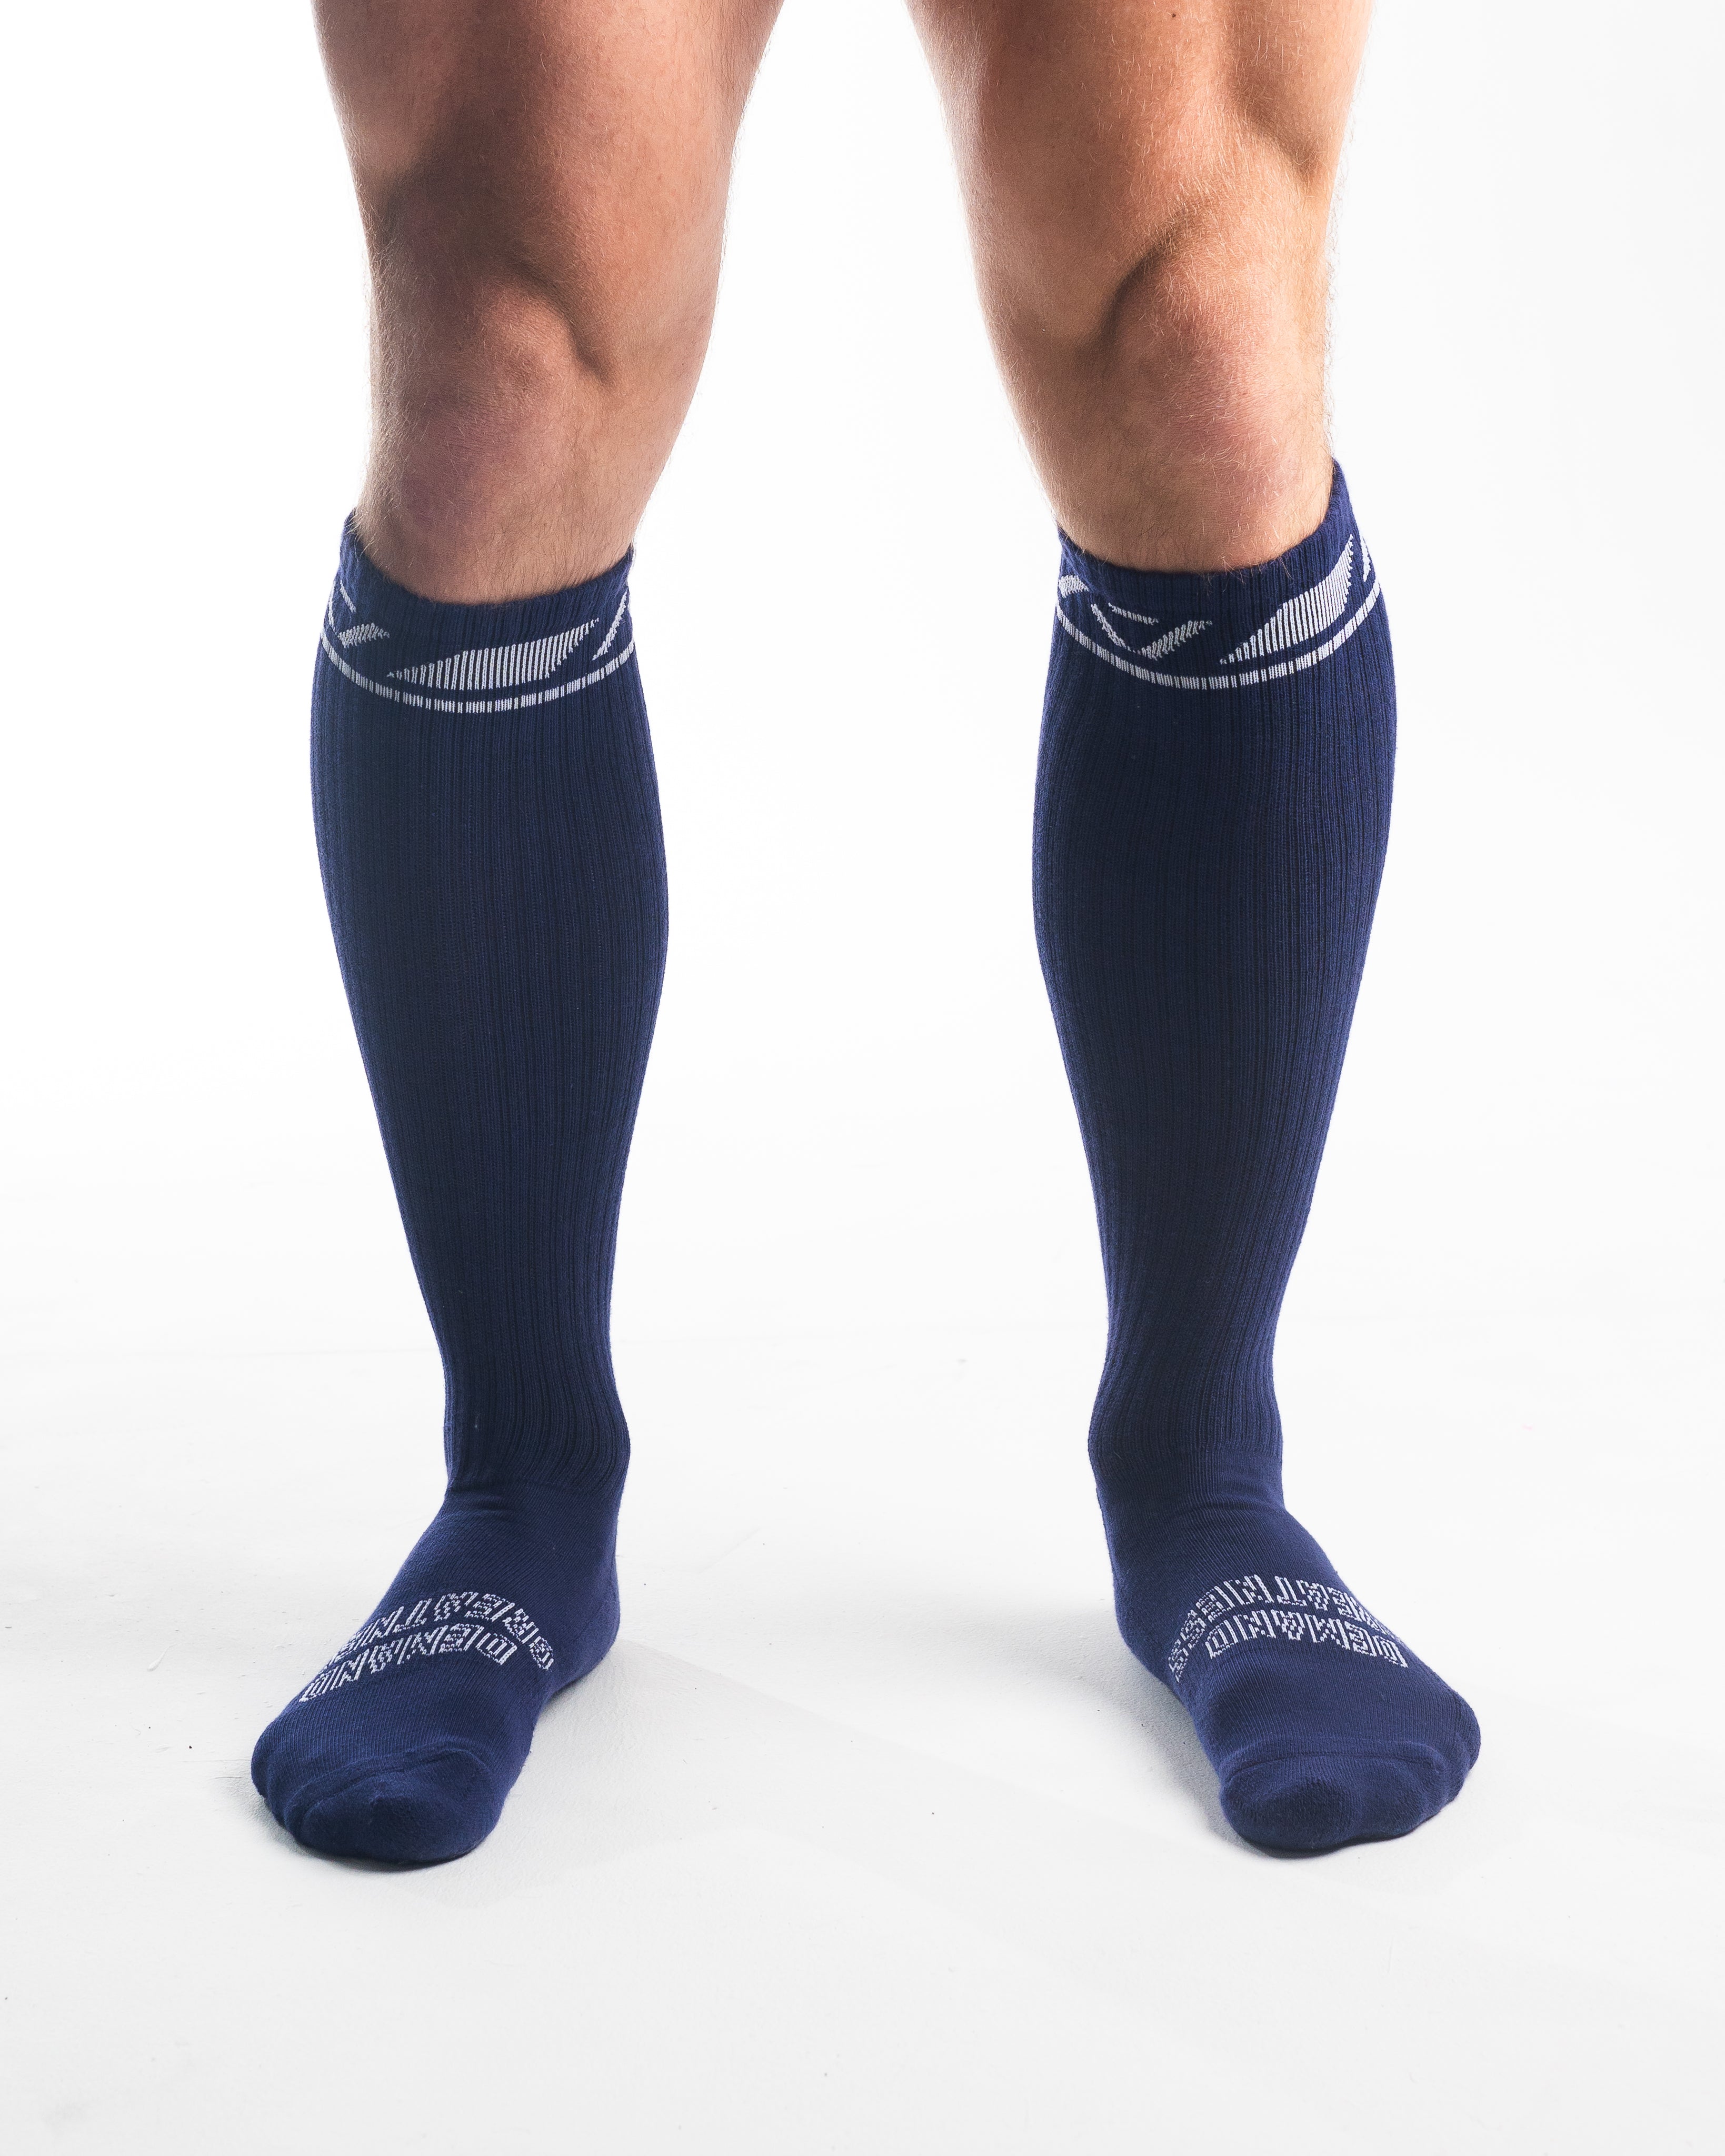 A7 Night Light Deadlift socks are designed specifically for pulls and keep your shins protected from scrapes. A7 deadlift socks are a perfect pair to wear in training or powerlifting competition. The IPF Approved Kit includes Powerlifting Singlet, A7 Meet Shirt, A7 Zebra Wrist Wraps, A7 Deadlift Socks, Hourglass Knee Sleeves (Stiff Knee Sleeves and Rigor Mortis Knee Sleeves). Genouillères powerlifting shipping to France, Spain, Ireland, Germany, Italy, Sweden and EU.